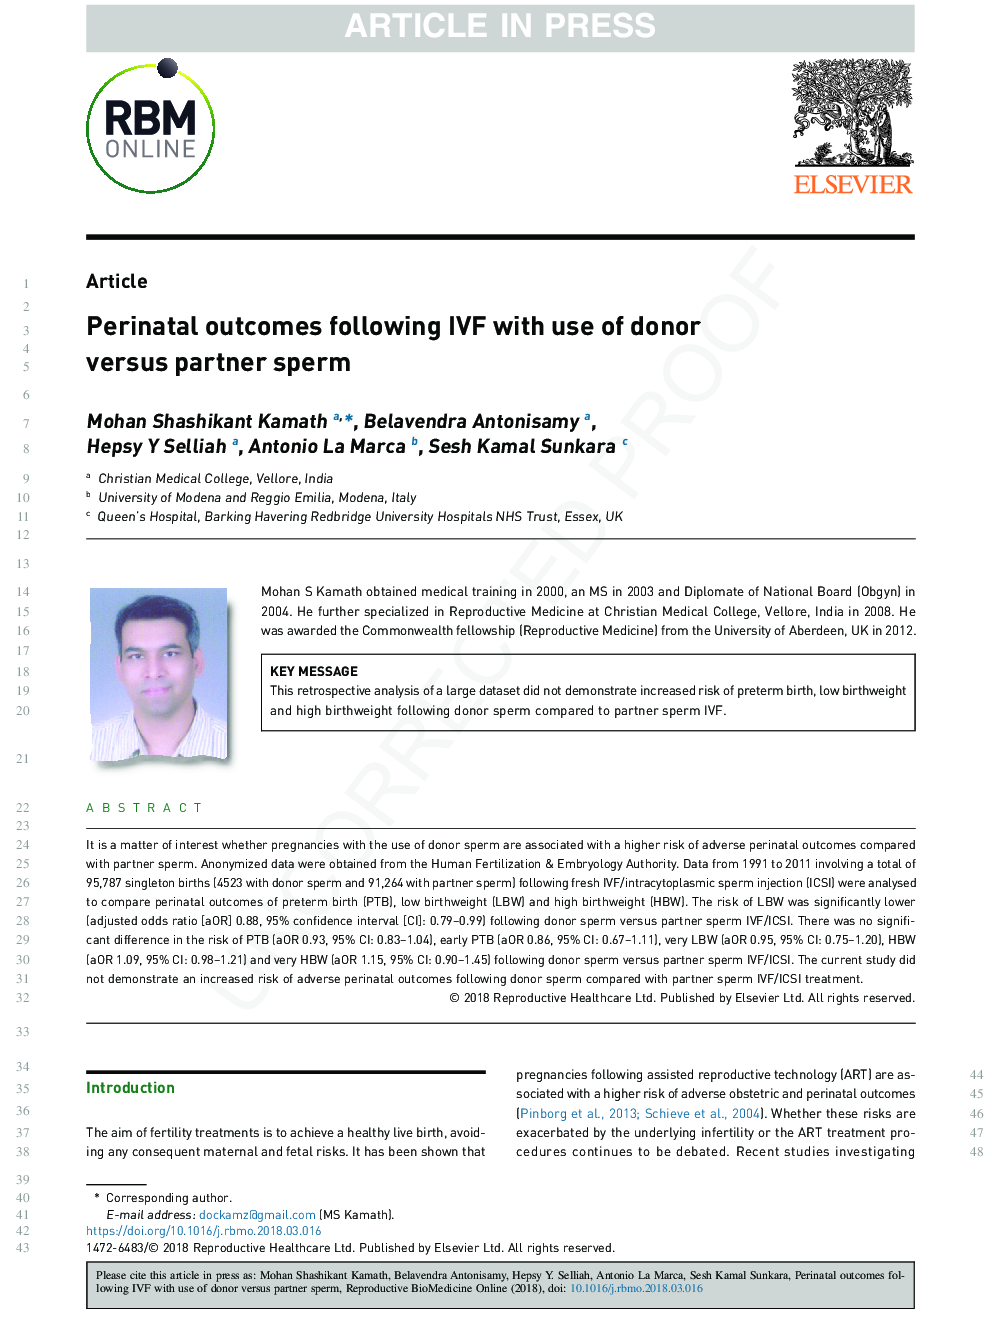 Perinatal outcomes following IVF with use of donor versus partner sperm